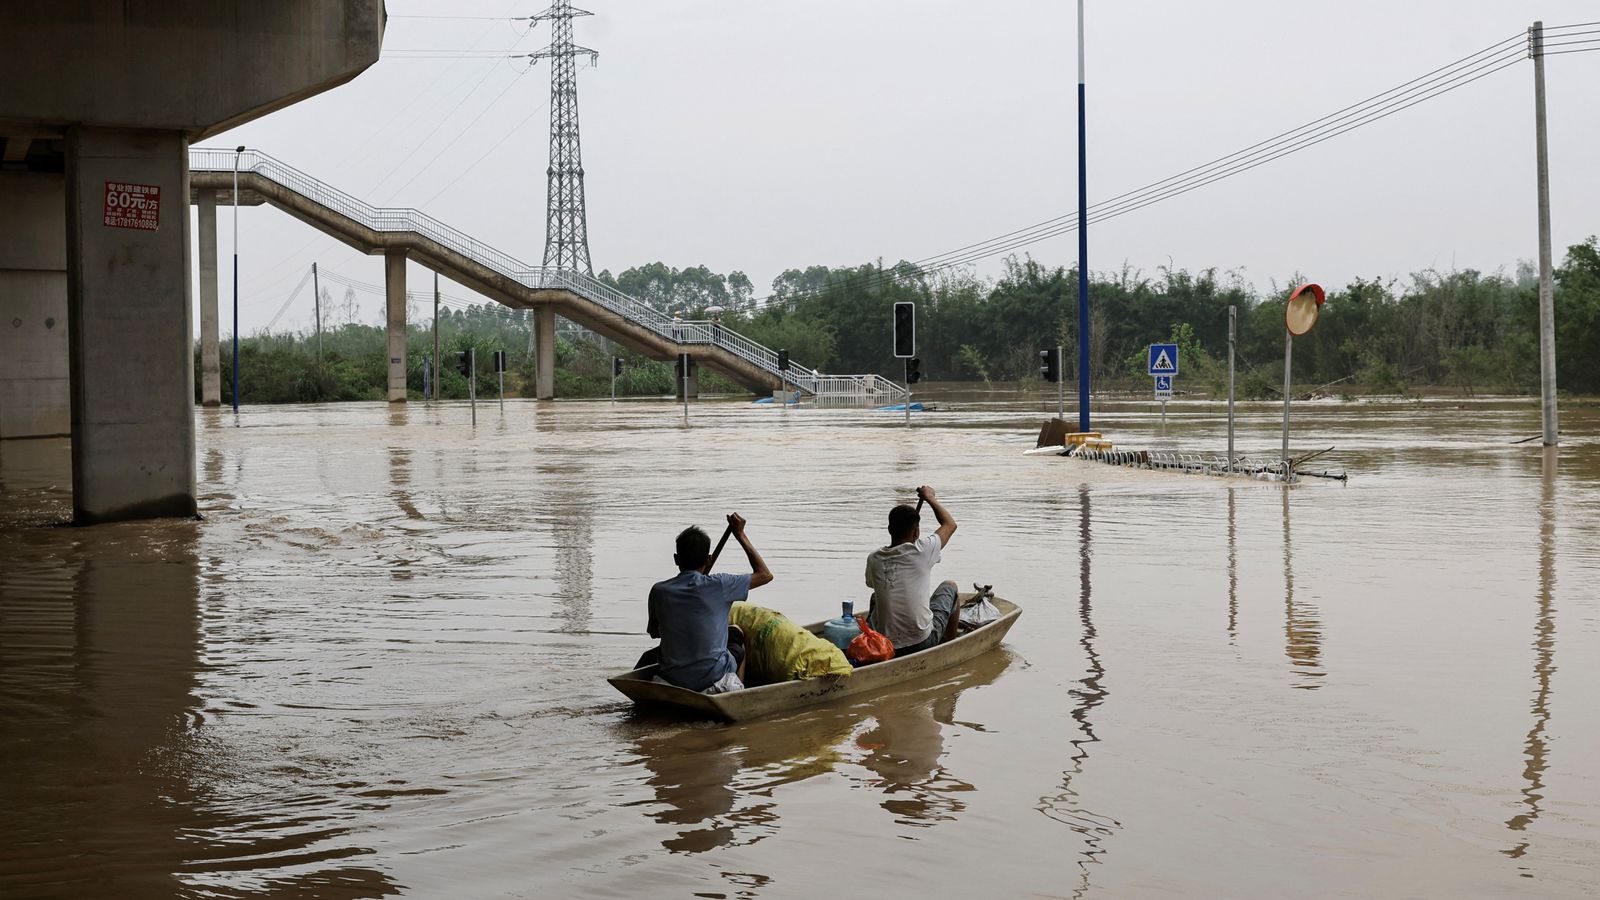 China floods: Four dead as cities submerged after days of record breaking rainfall